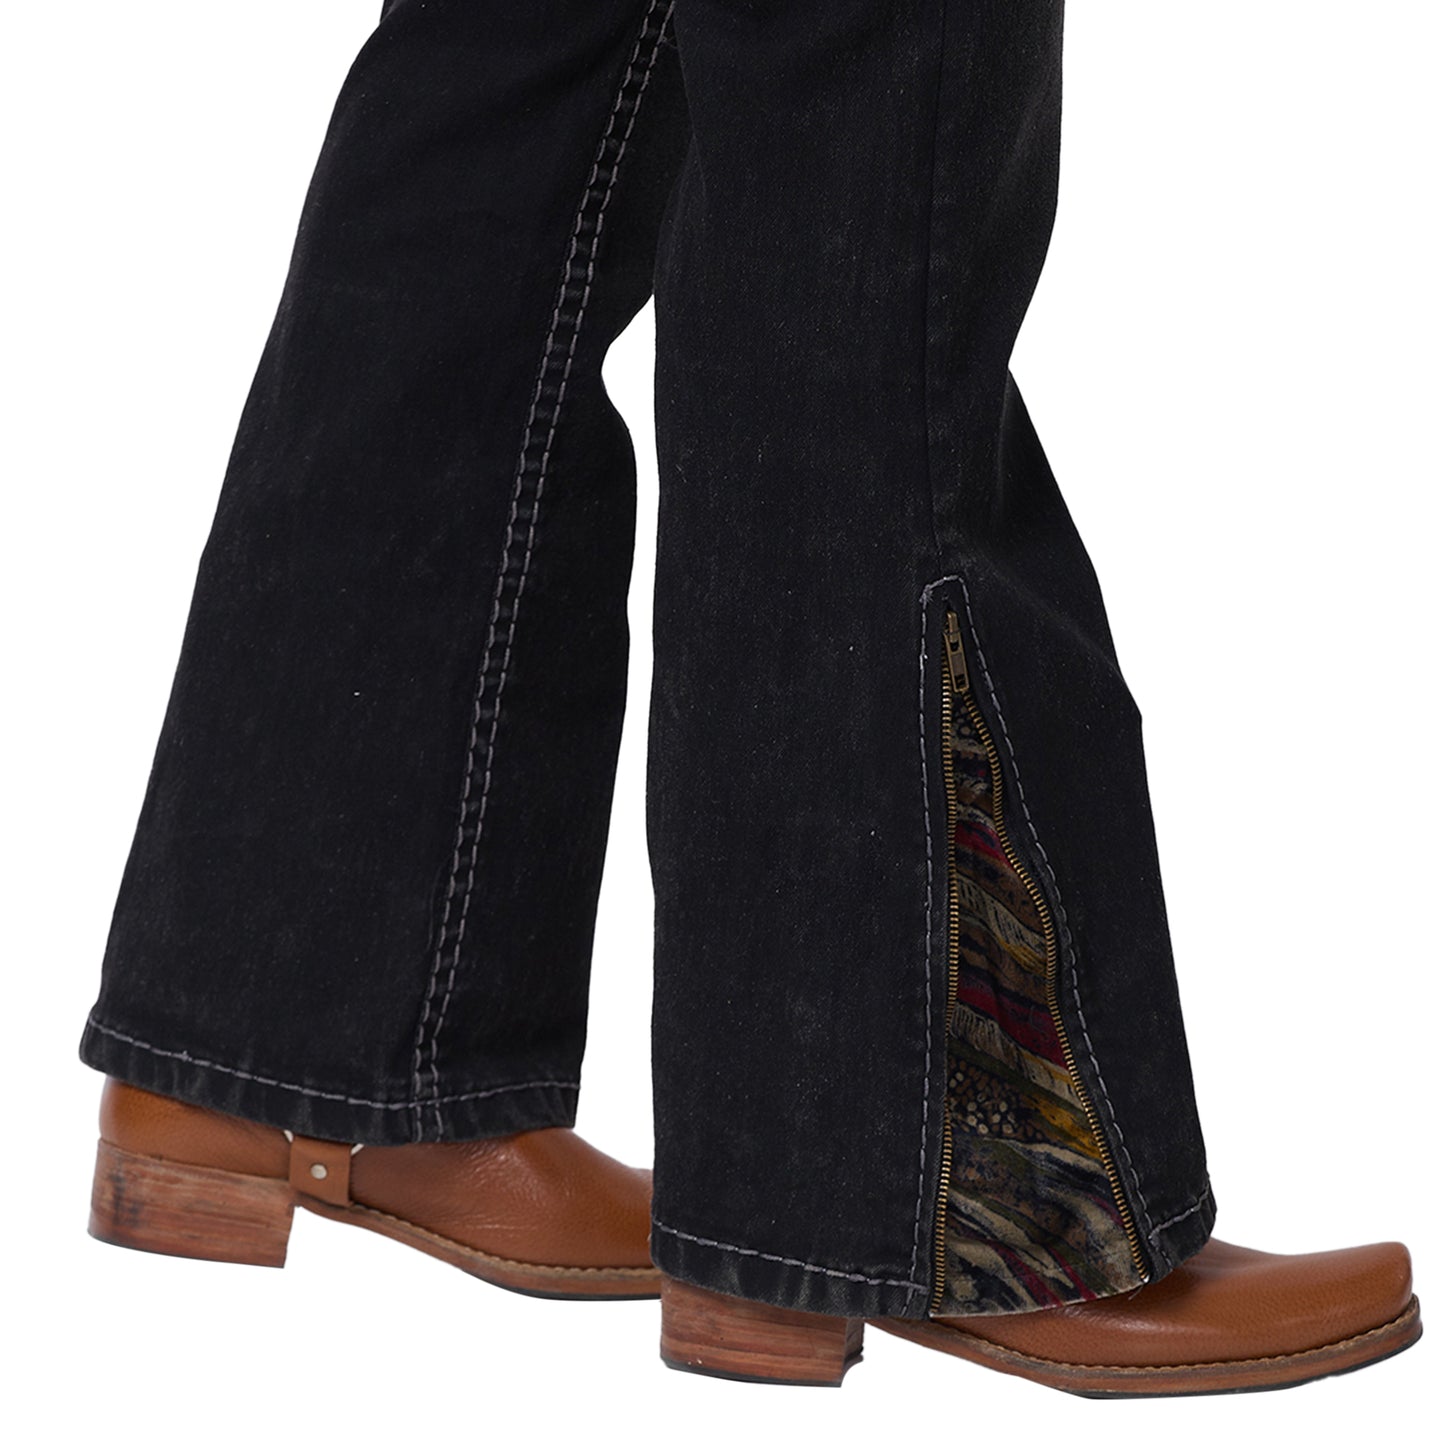 Mens Black Faded Bootcut Slim Fit Jeans With Strechable Saddle Stitch & Zipper Bottom.